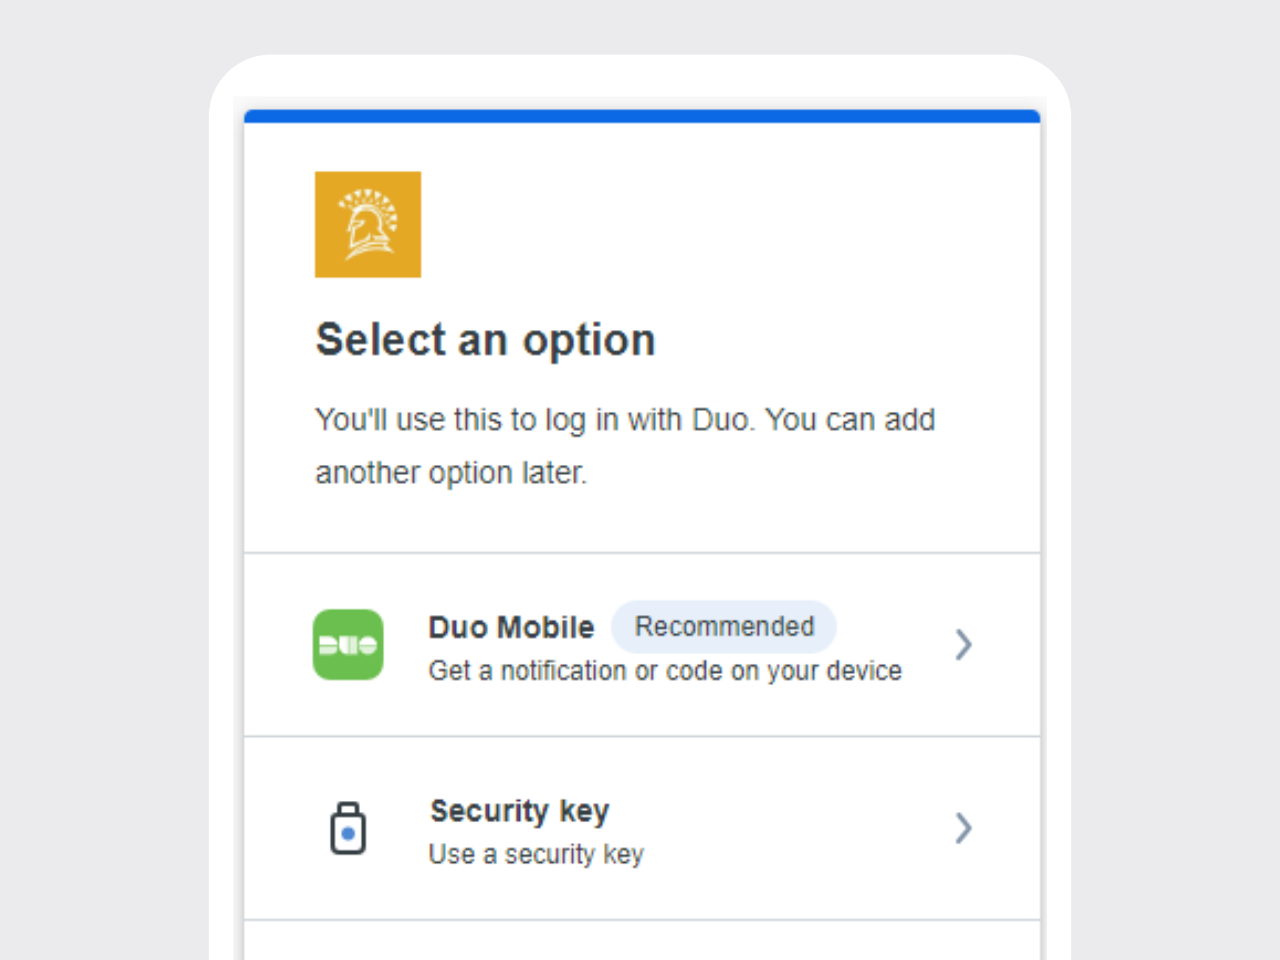 Option select for Duo Mobile or Security Key.